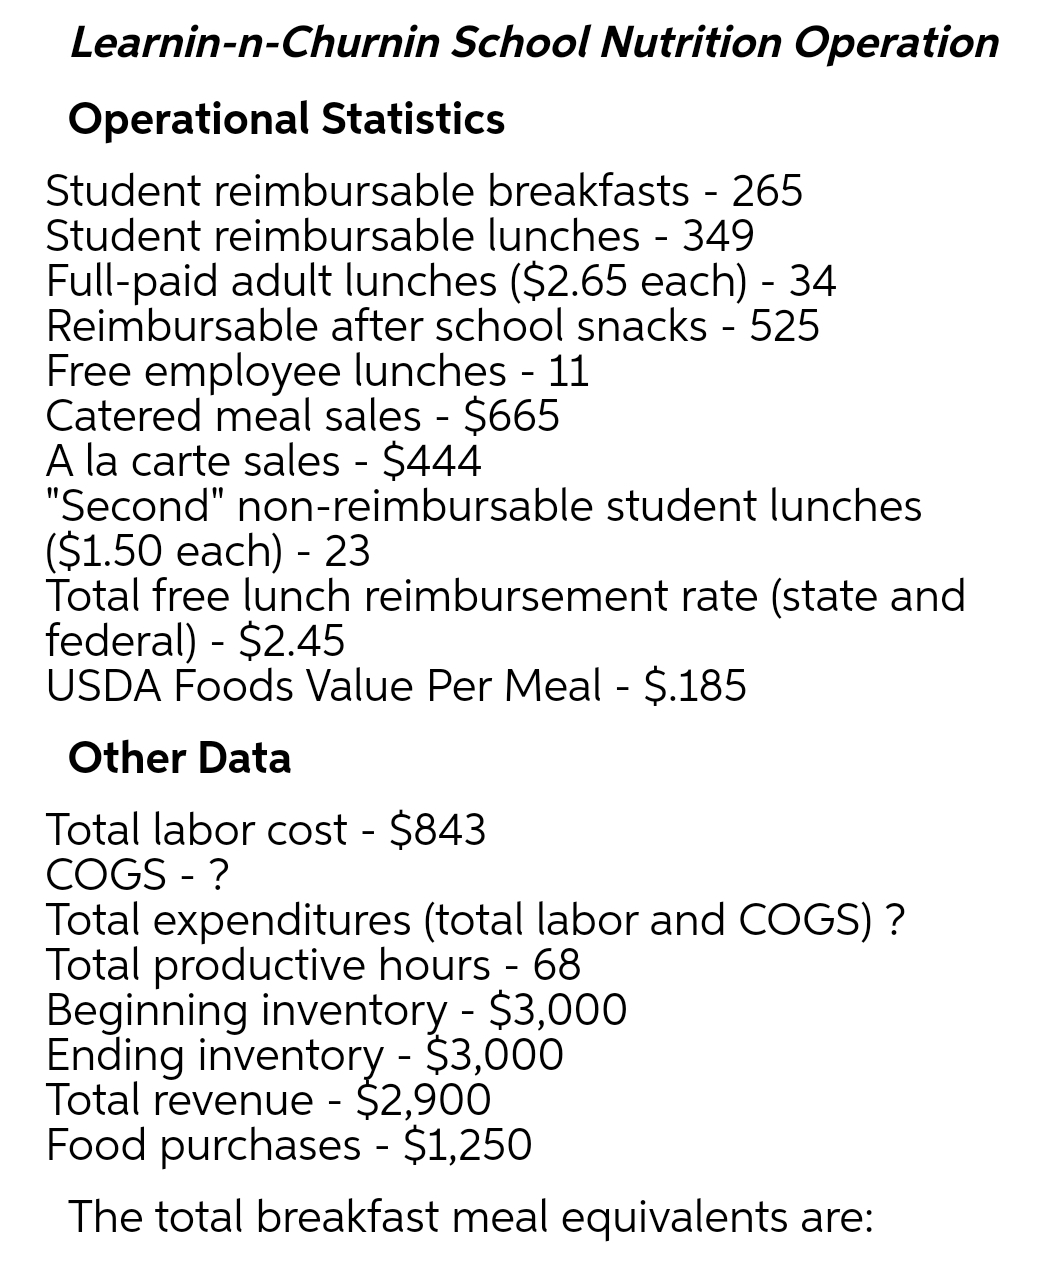 Learnin-n-Churnin School Nutrition Operation
Operational Statistics
Student reimbursable breakfasts - 265
Student reimbursable lunches - 349
Full-paid adult lunches ($2.65 each) - 34
Reimbursable after school snacks - 525
Free employee lunches - 11
Catered meal sales - $665
A la carte sales - $444
"Second" non-reimbursable student lunches
($1.50 each) - 23
Total free lunch reimbursement rate (state and
federal) - $2.45
USDA Foods Value Per Meal - $.185
Other Data
Total labor cost - $843
CO
GS - ?
Total expenditures (total labor and COGS) ?
Total productive hours - 68
Beginning inventory - $3,000
Ending inventory - $3,000
Total revenue - $2,900
Food purchases - $1,250
The total breakfast meal equivalents are:
